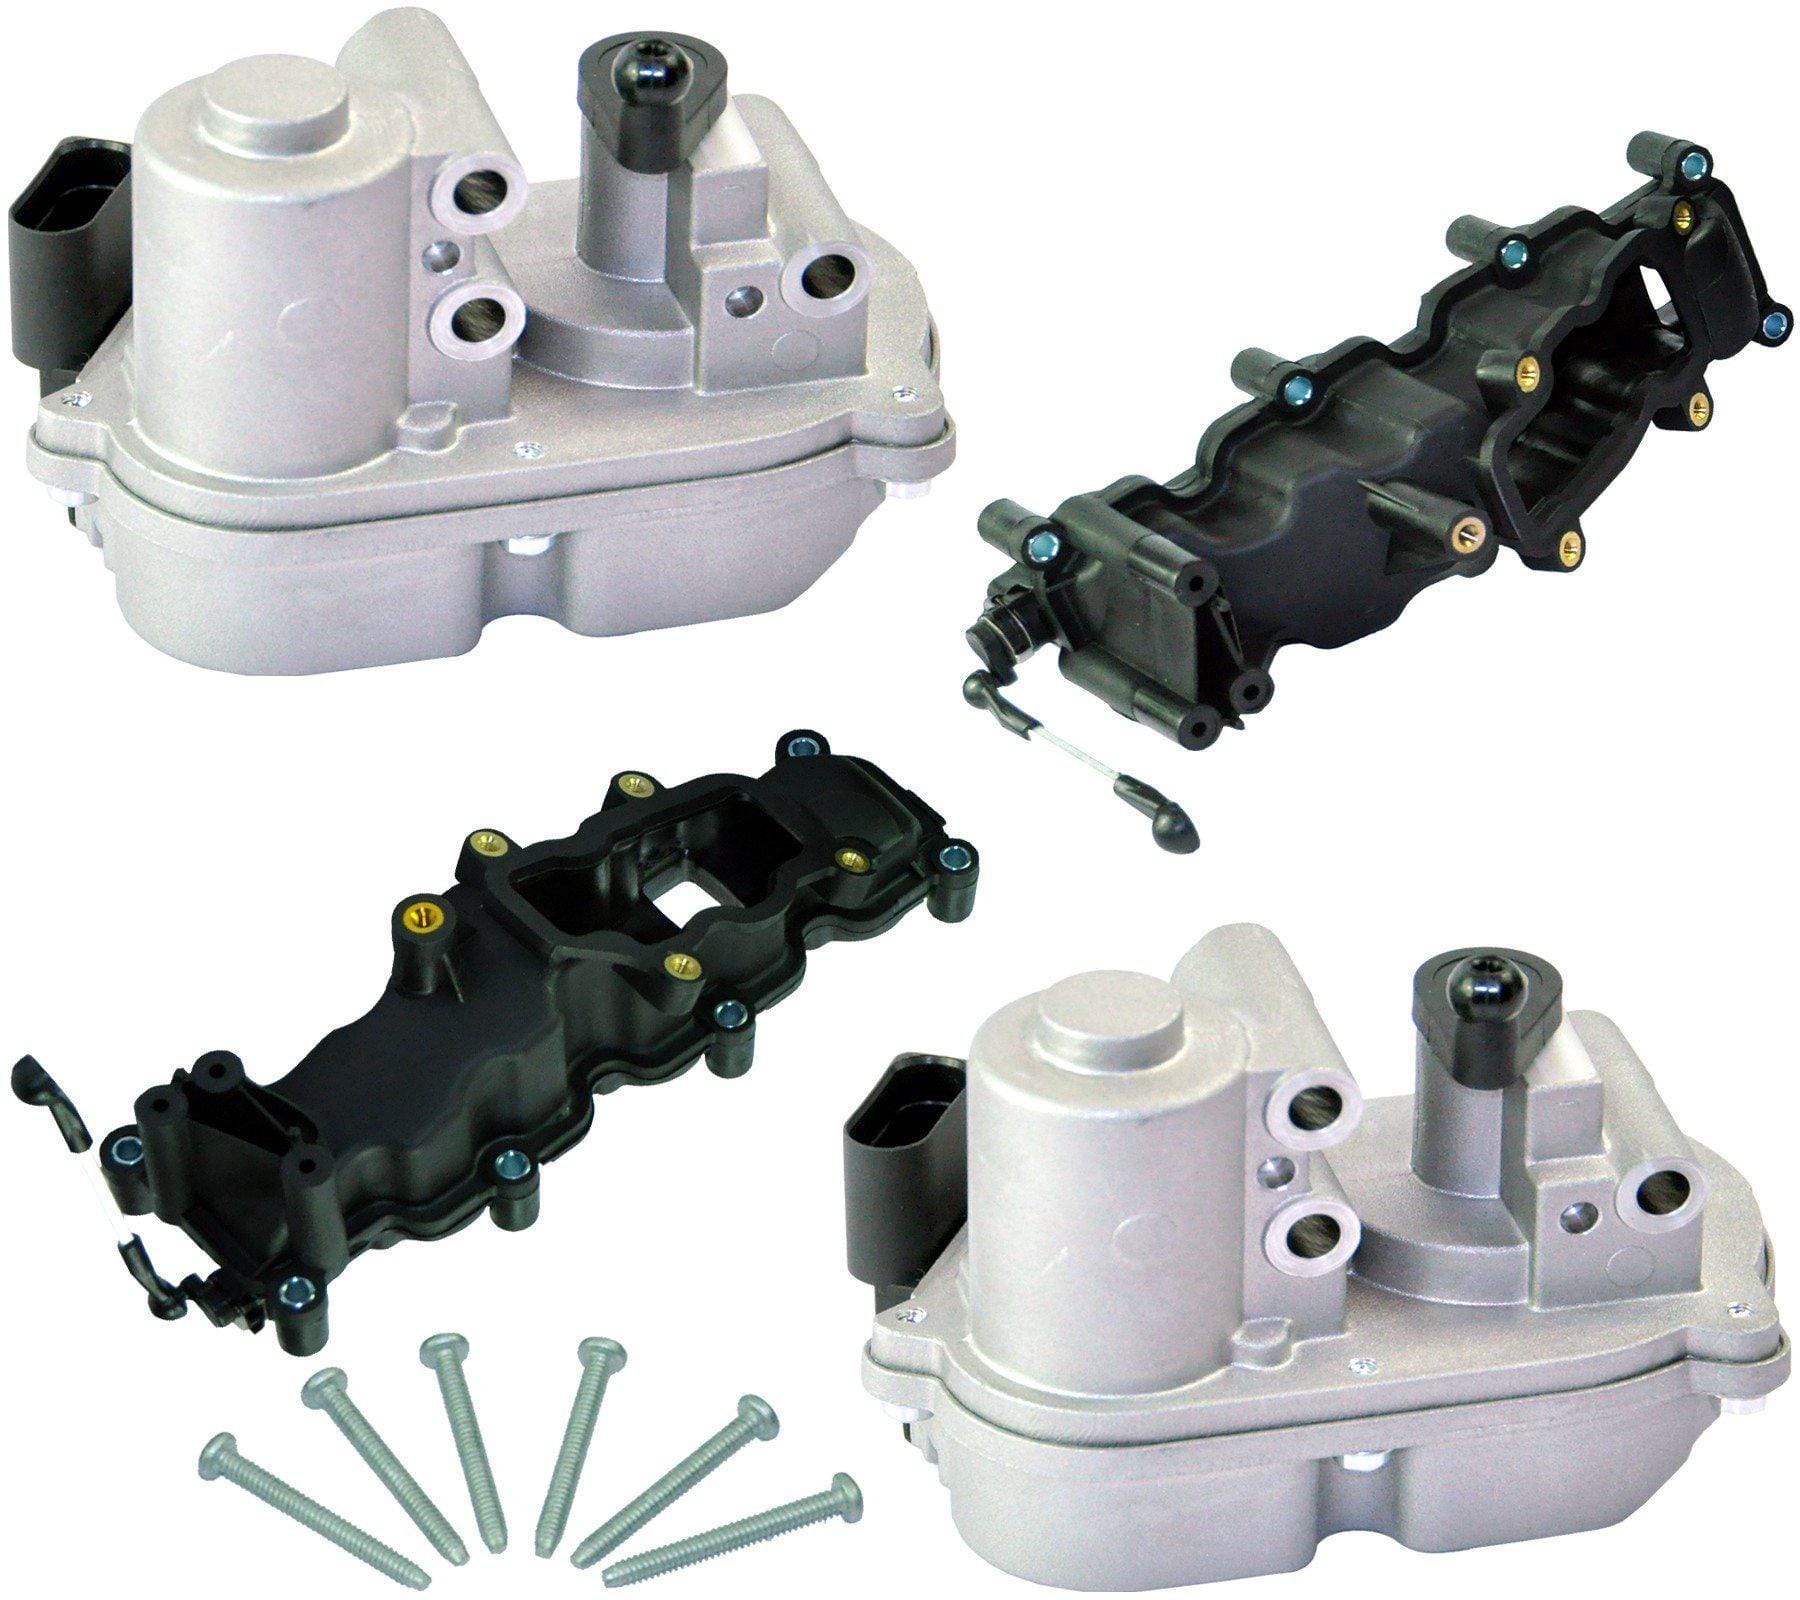 Pair Of Intake Manifolds & Actuator Motors For Audi, VW, and Ford